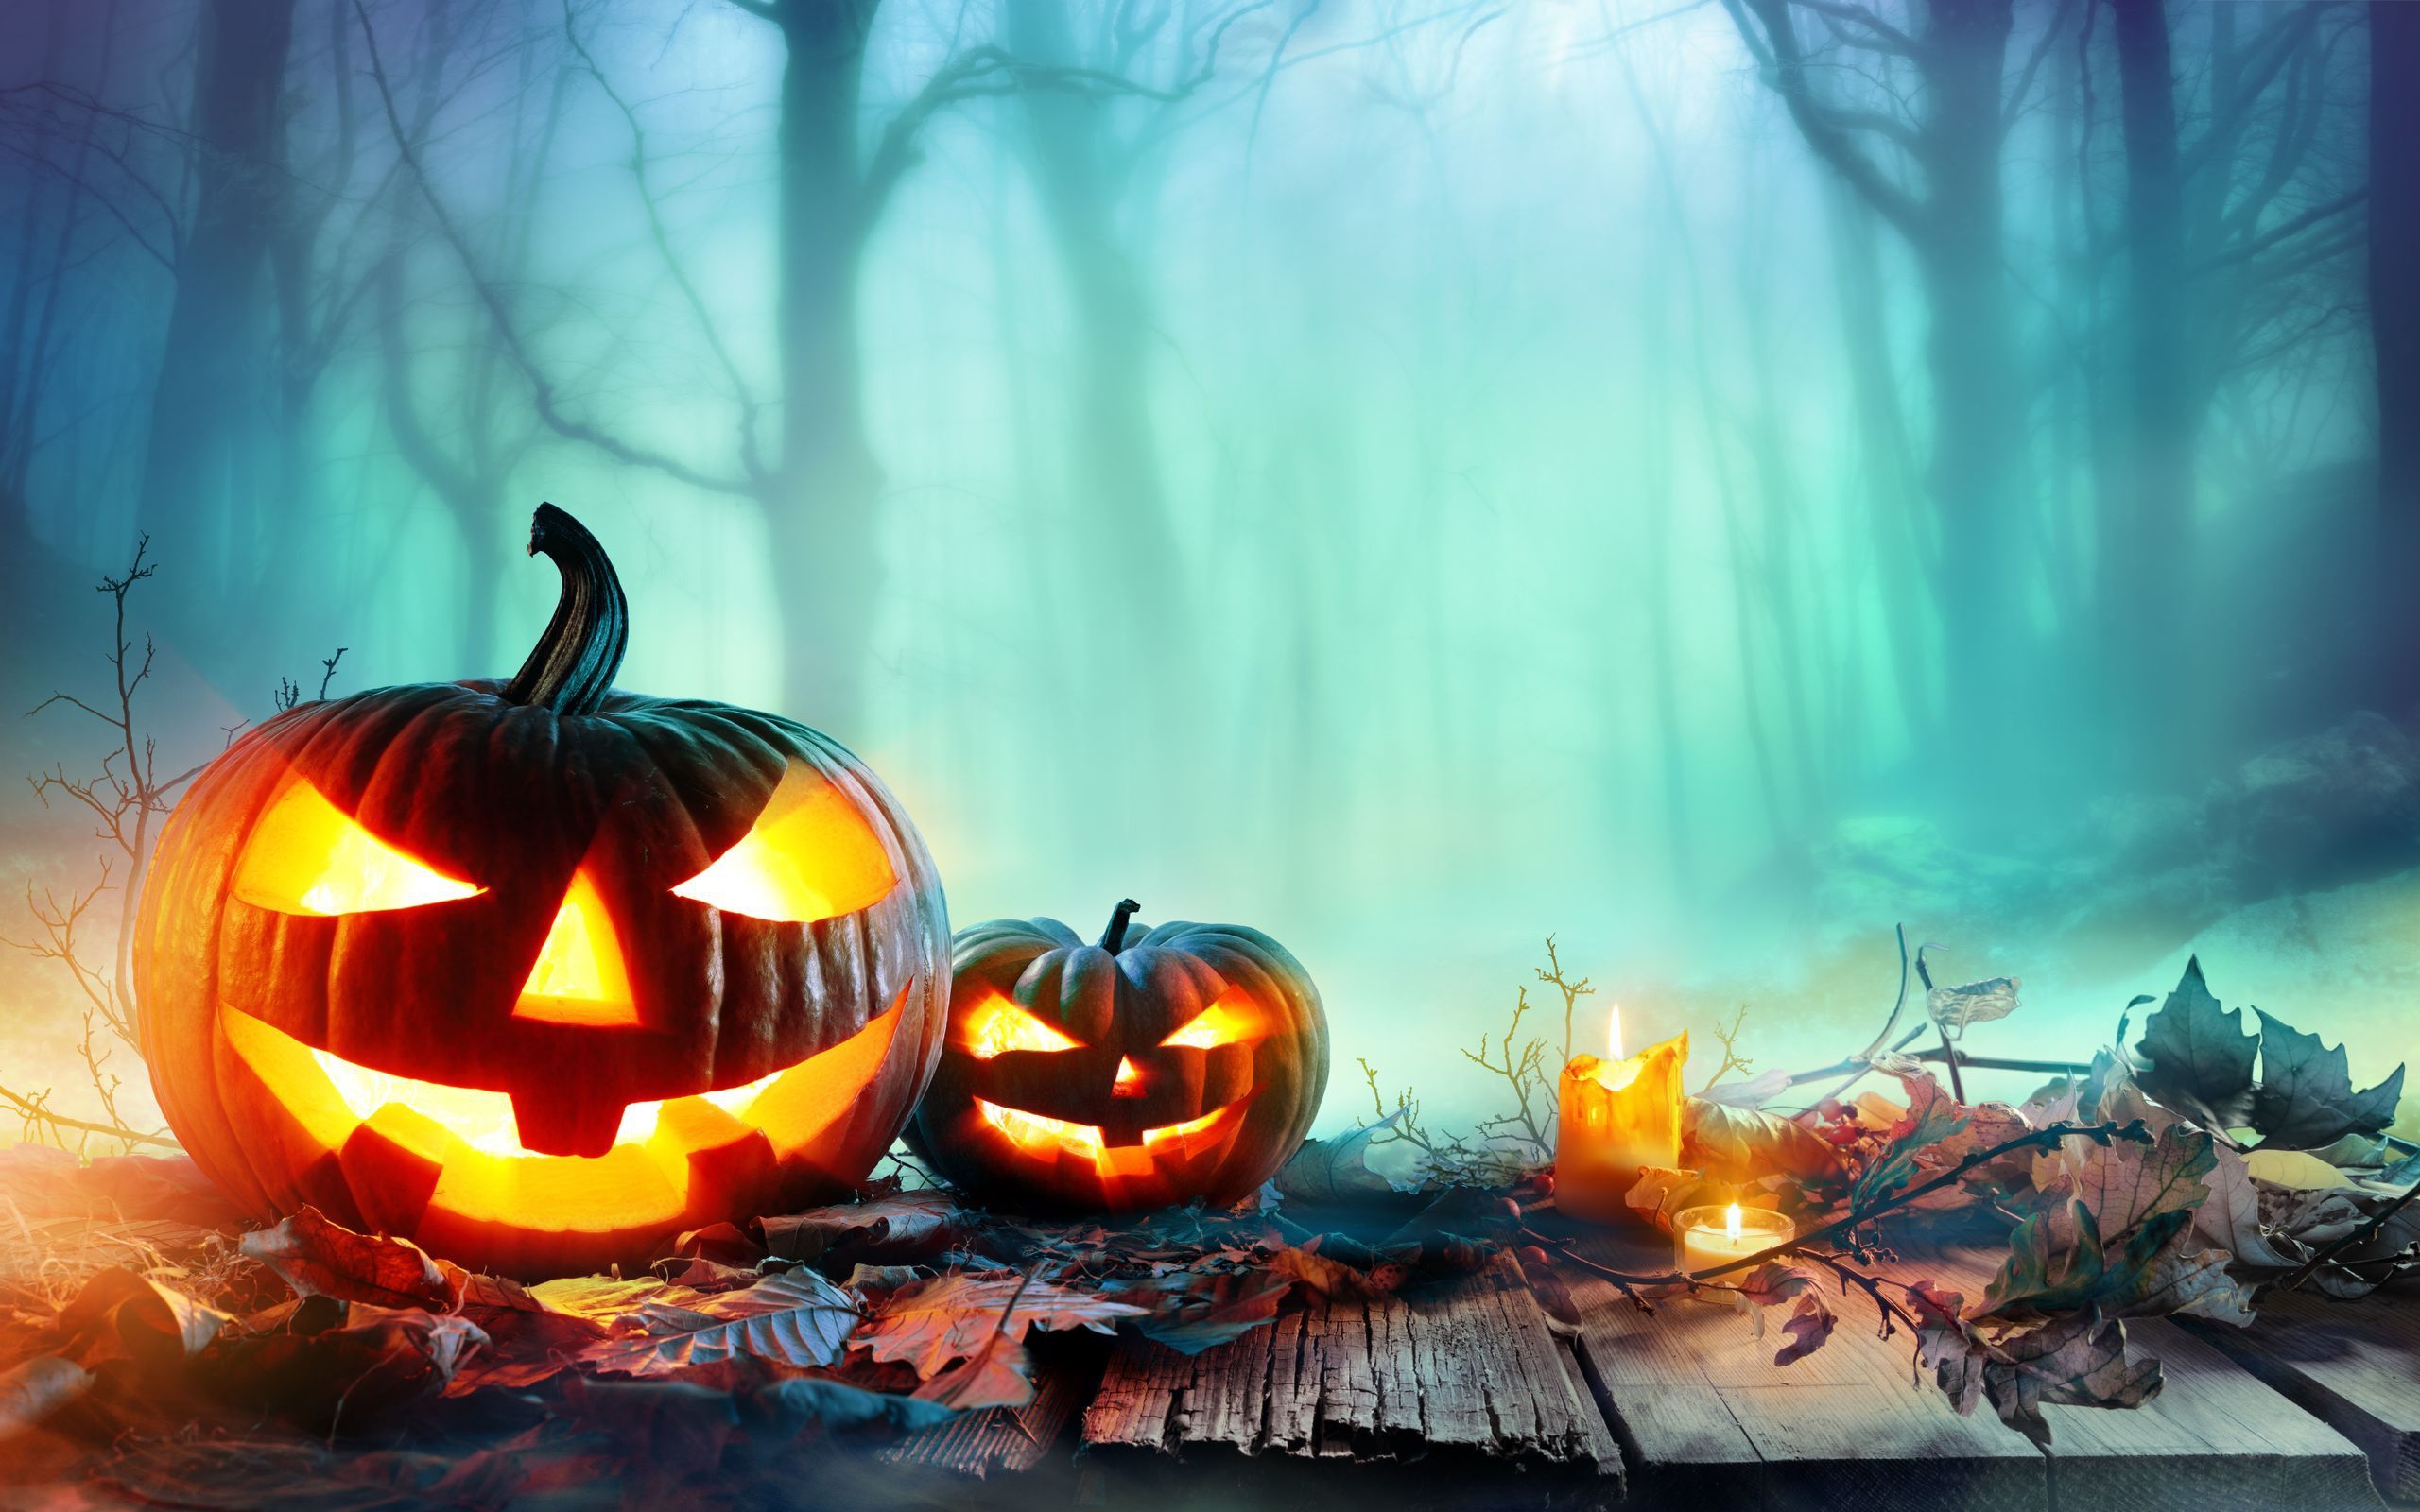 Download wallpaper Halloween, pumpkin, fairy forest, night, modern holiday, October burning candles for desktop with resolution 2560x1600. High Quality HD picture wallpaper